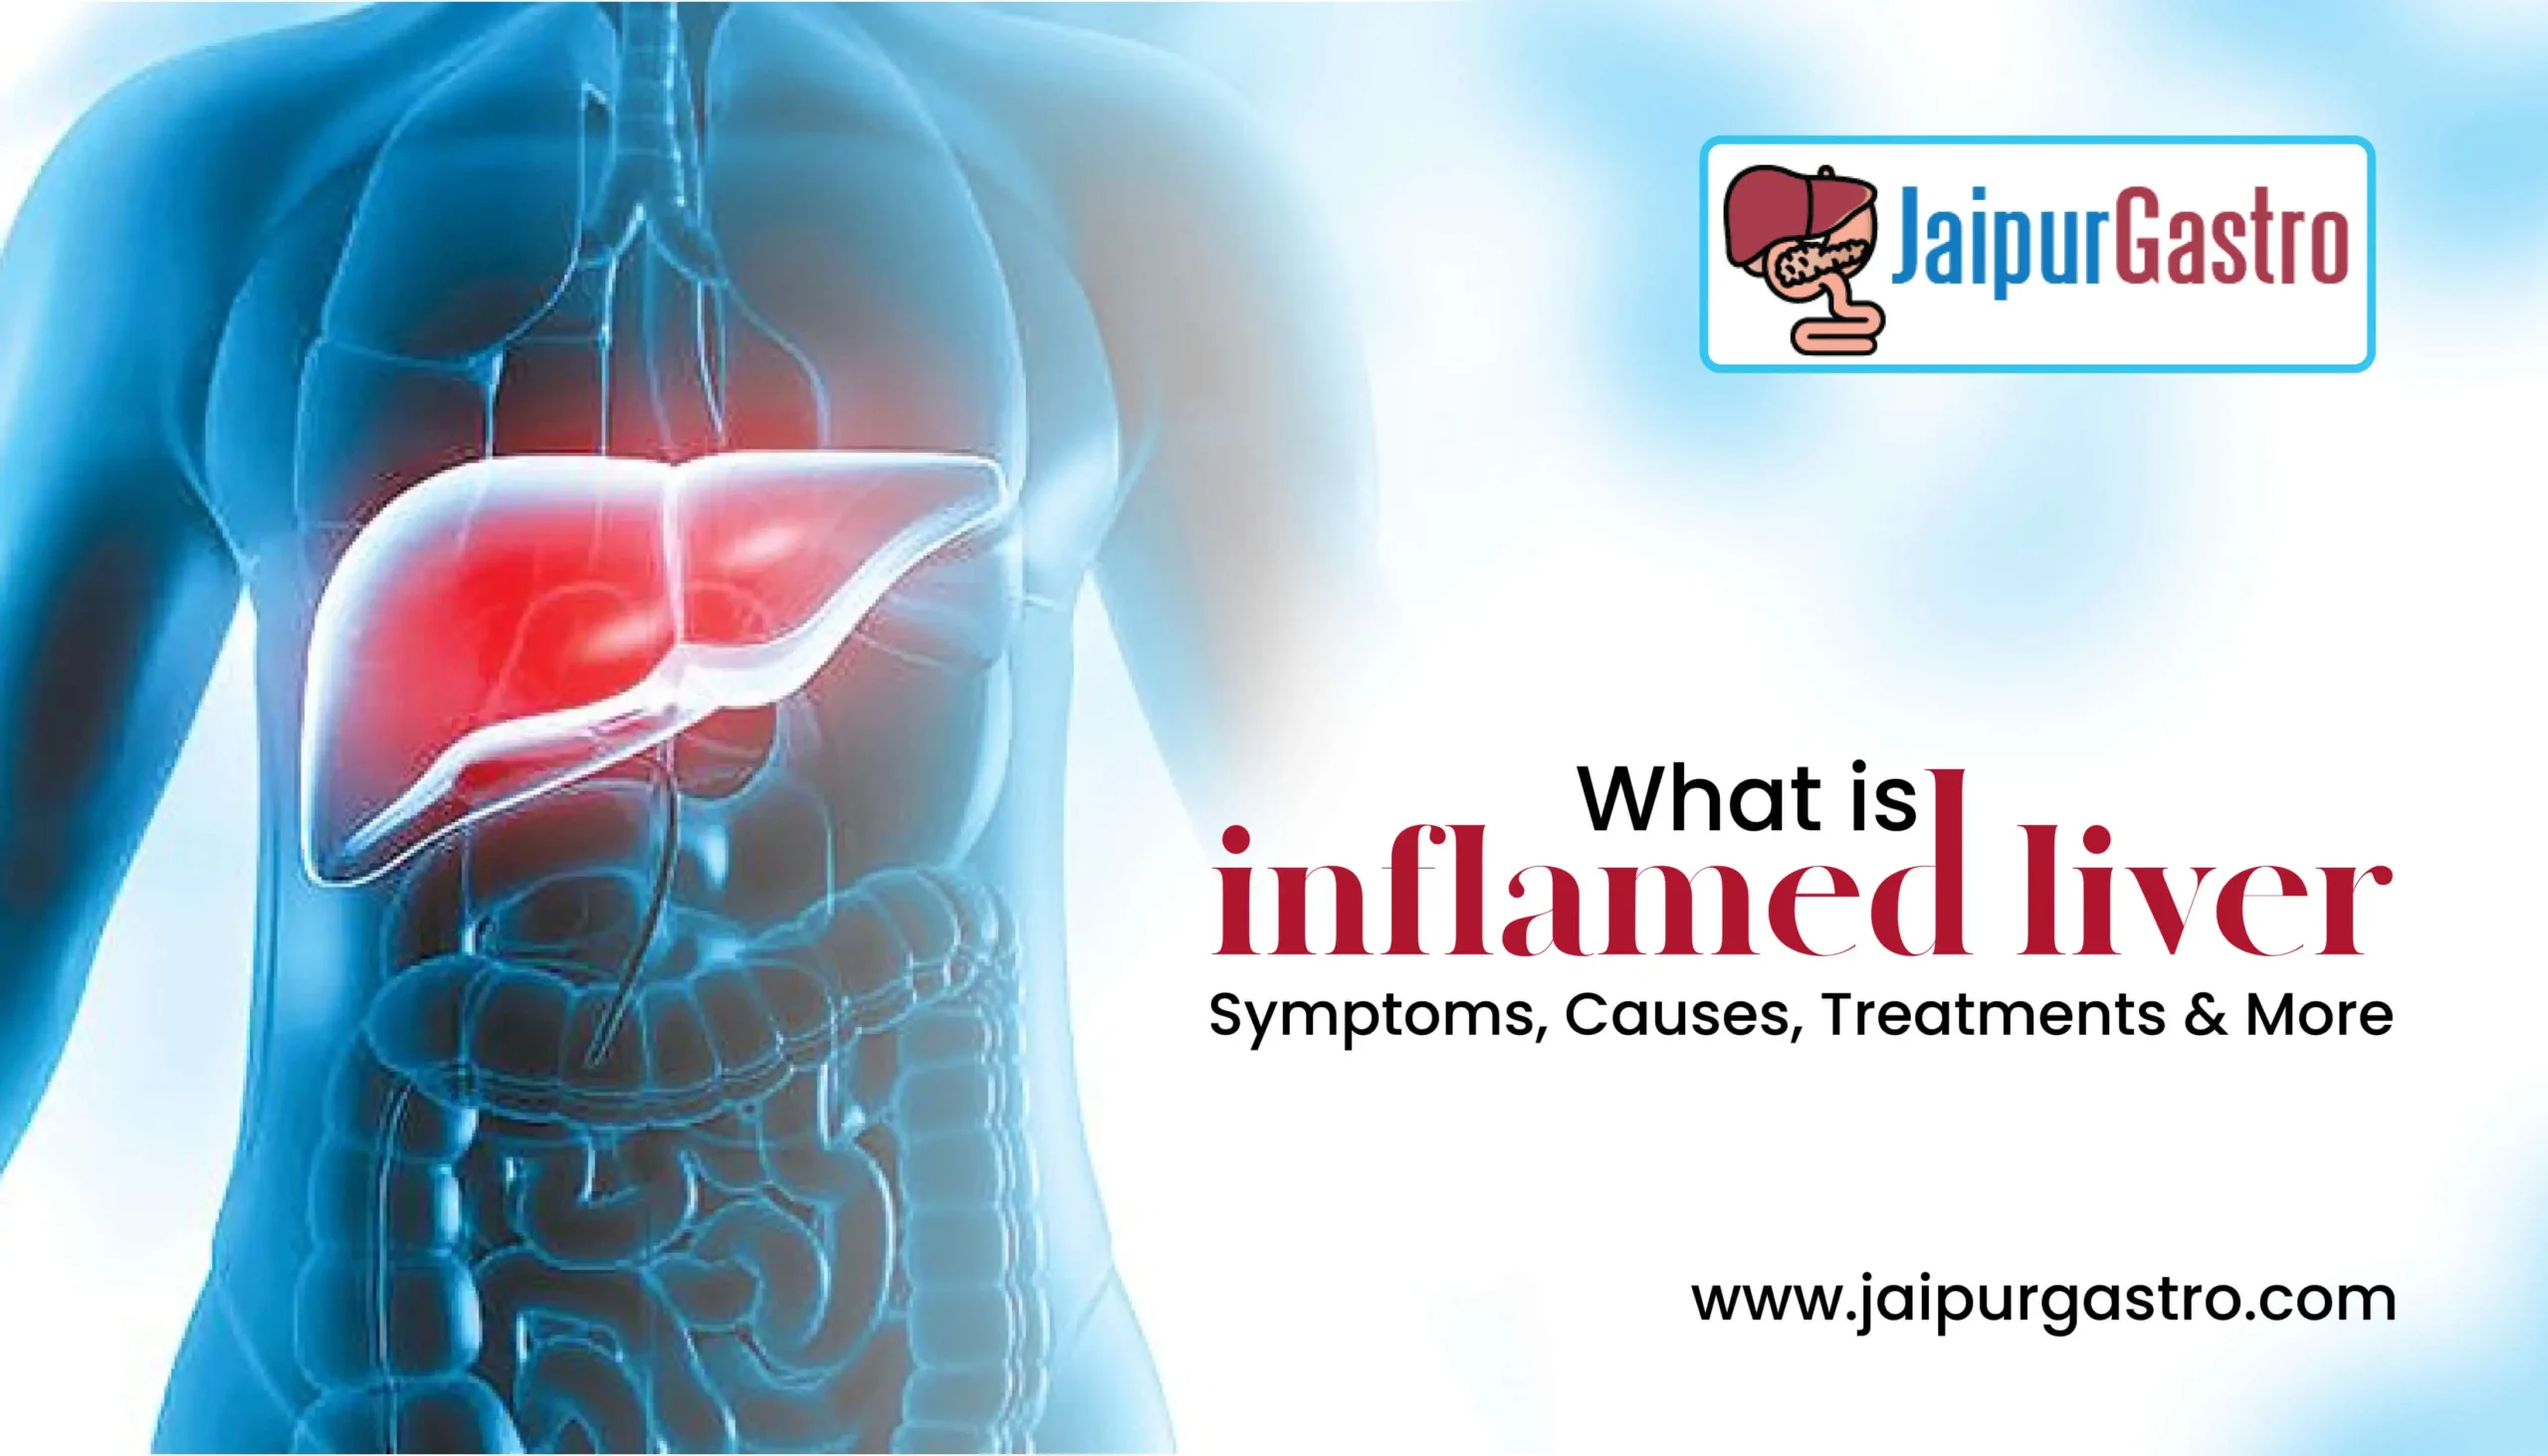 What is inflamed liver - Symptoms, Causes, Treatments & More?